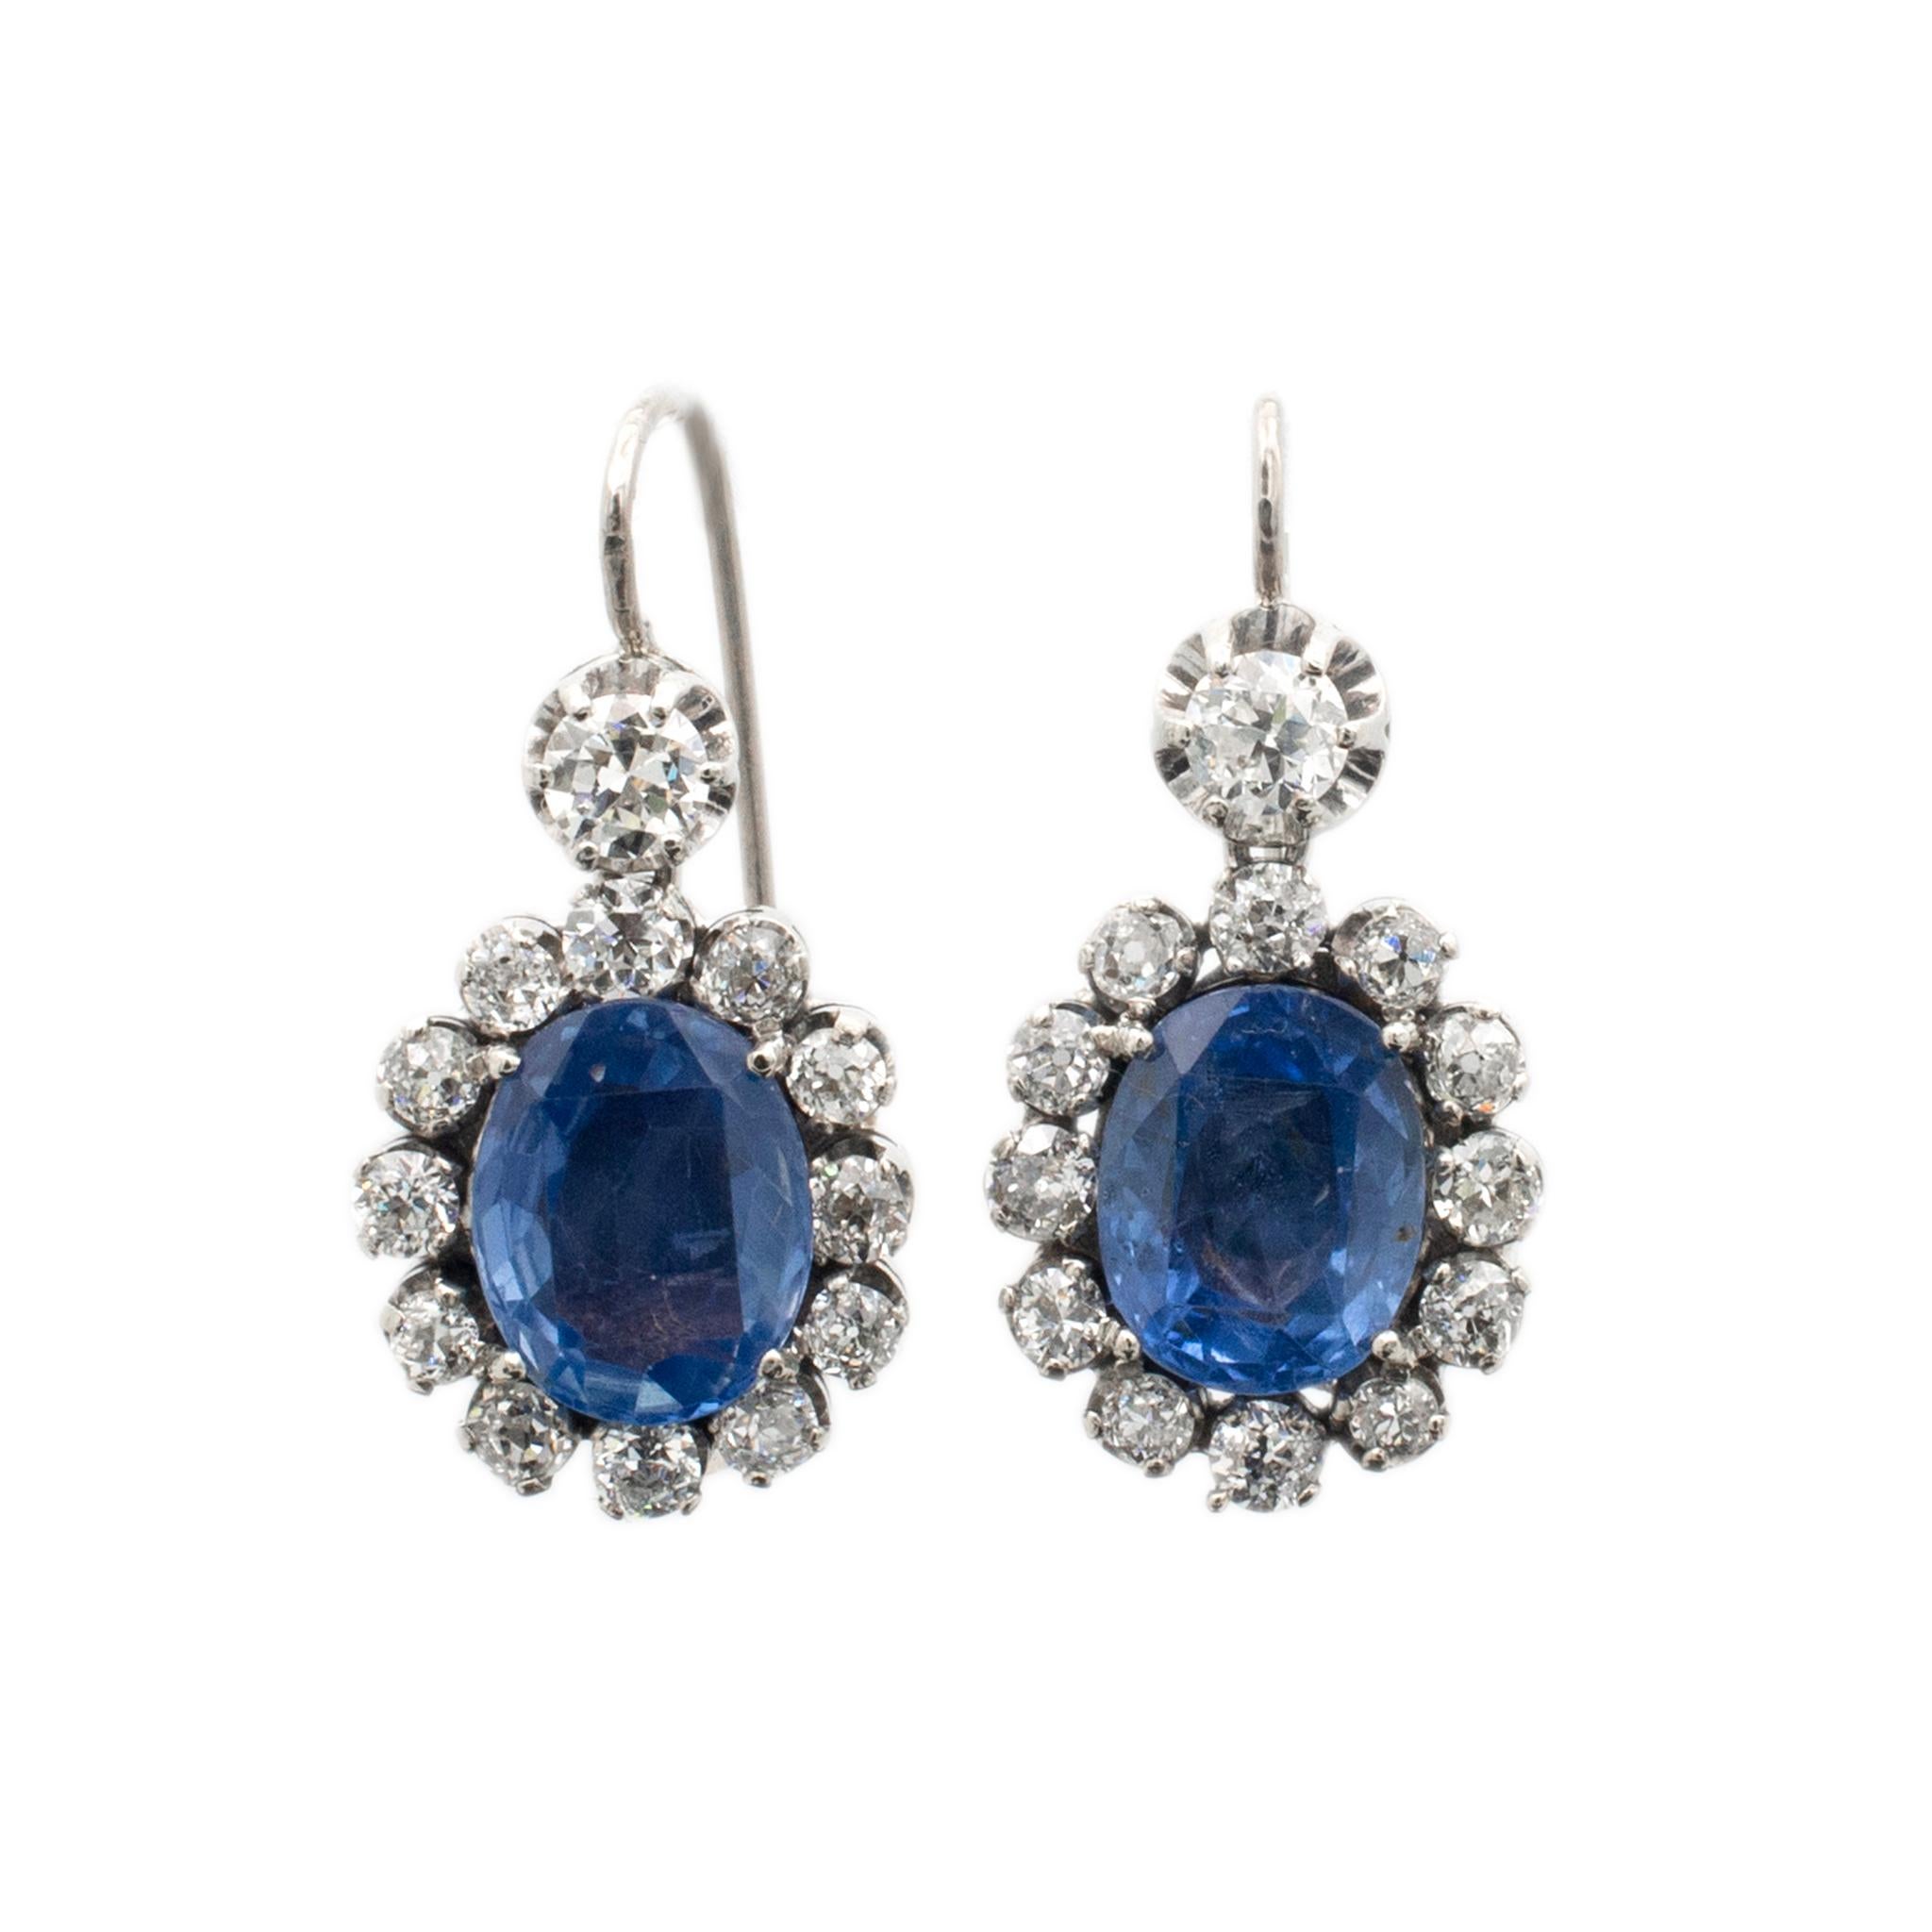 Gender: Ladies

Metal Type: Palladium & 18K White Gold

Length: 1.25 inches

Width: 15.30mm

Weight: 9.63 grams

Ladies 18K white gold and palladium diamond and sapphire art-deco, antique drop earrings. The metals were tested and determined to be